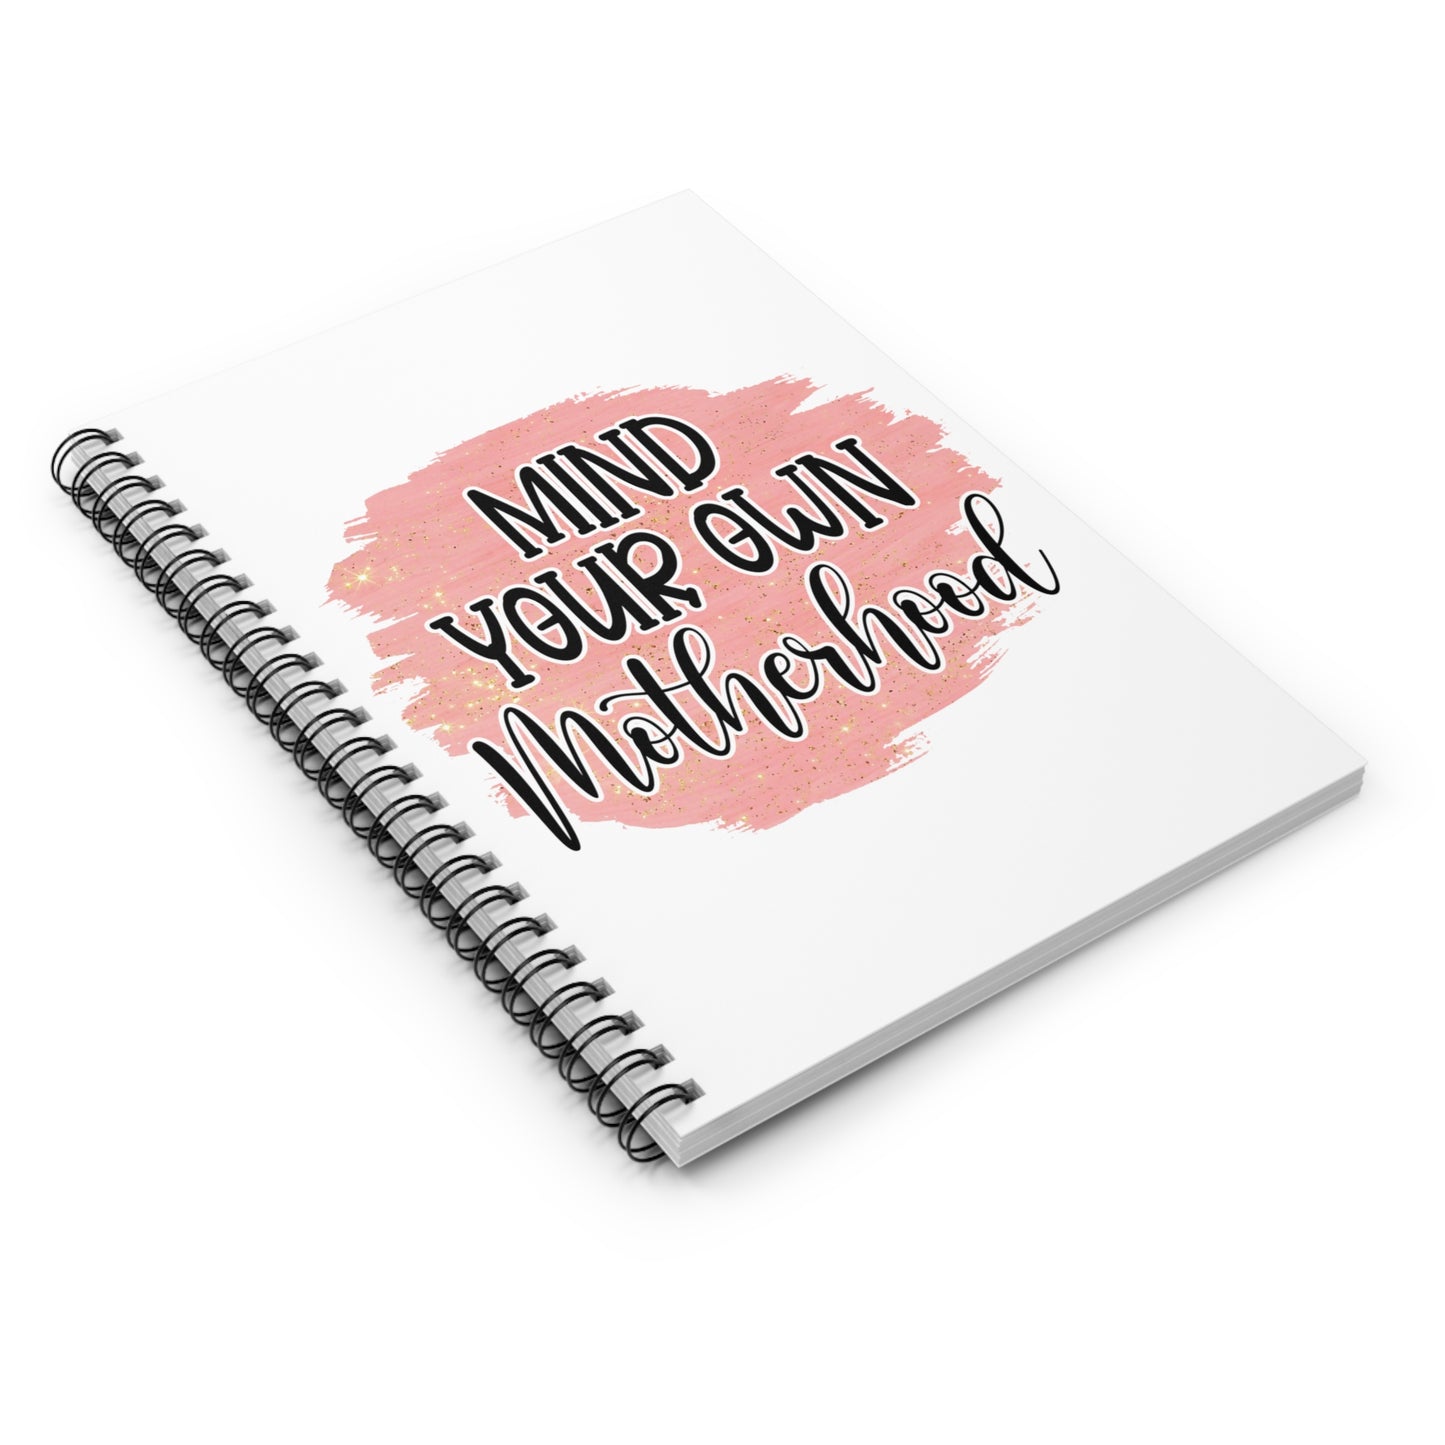 Mind Your Own Motherhood: Spiral Notebook - Log Books - Journals - Diaries - and More Custom Printed by TheGlassyLass